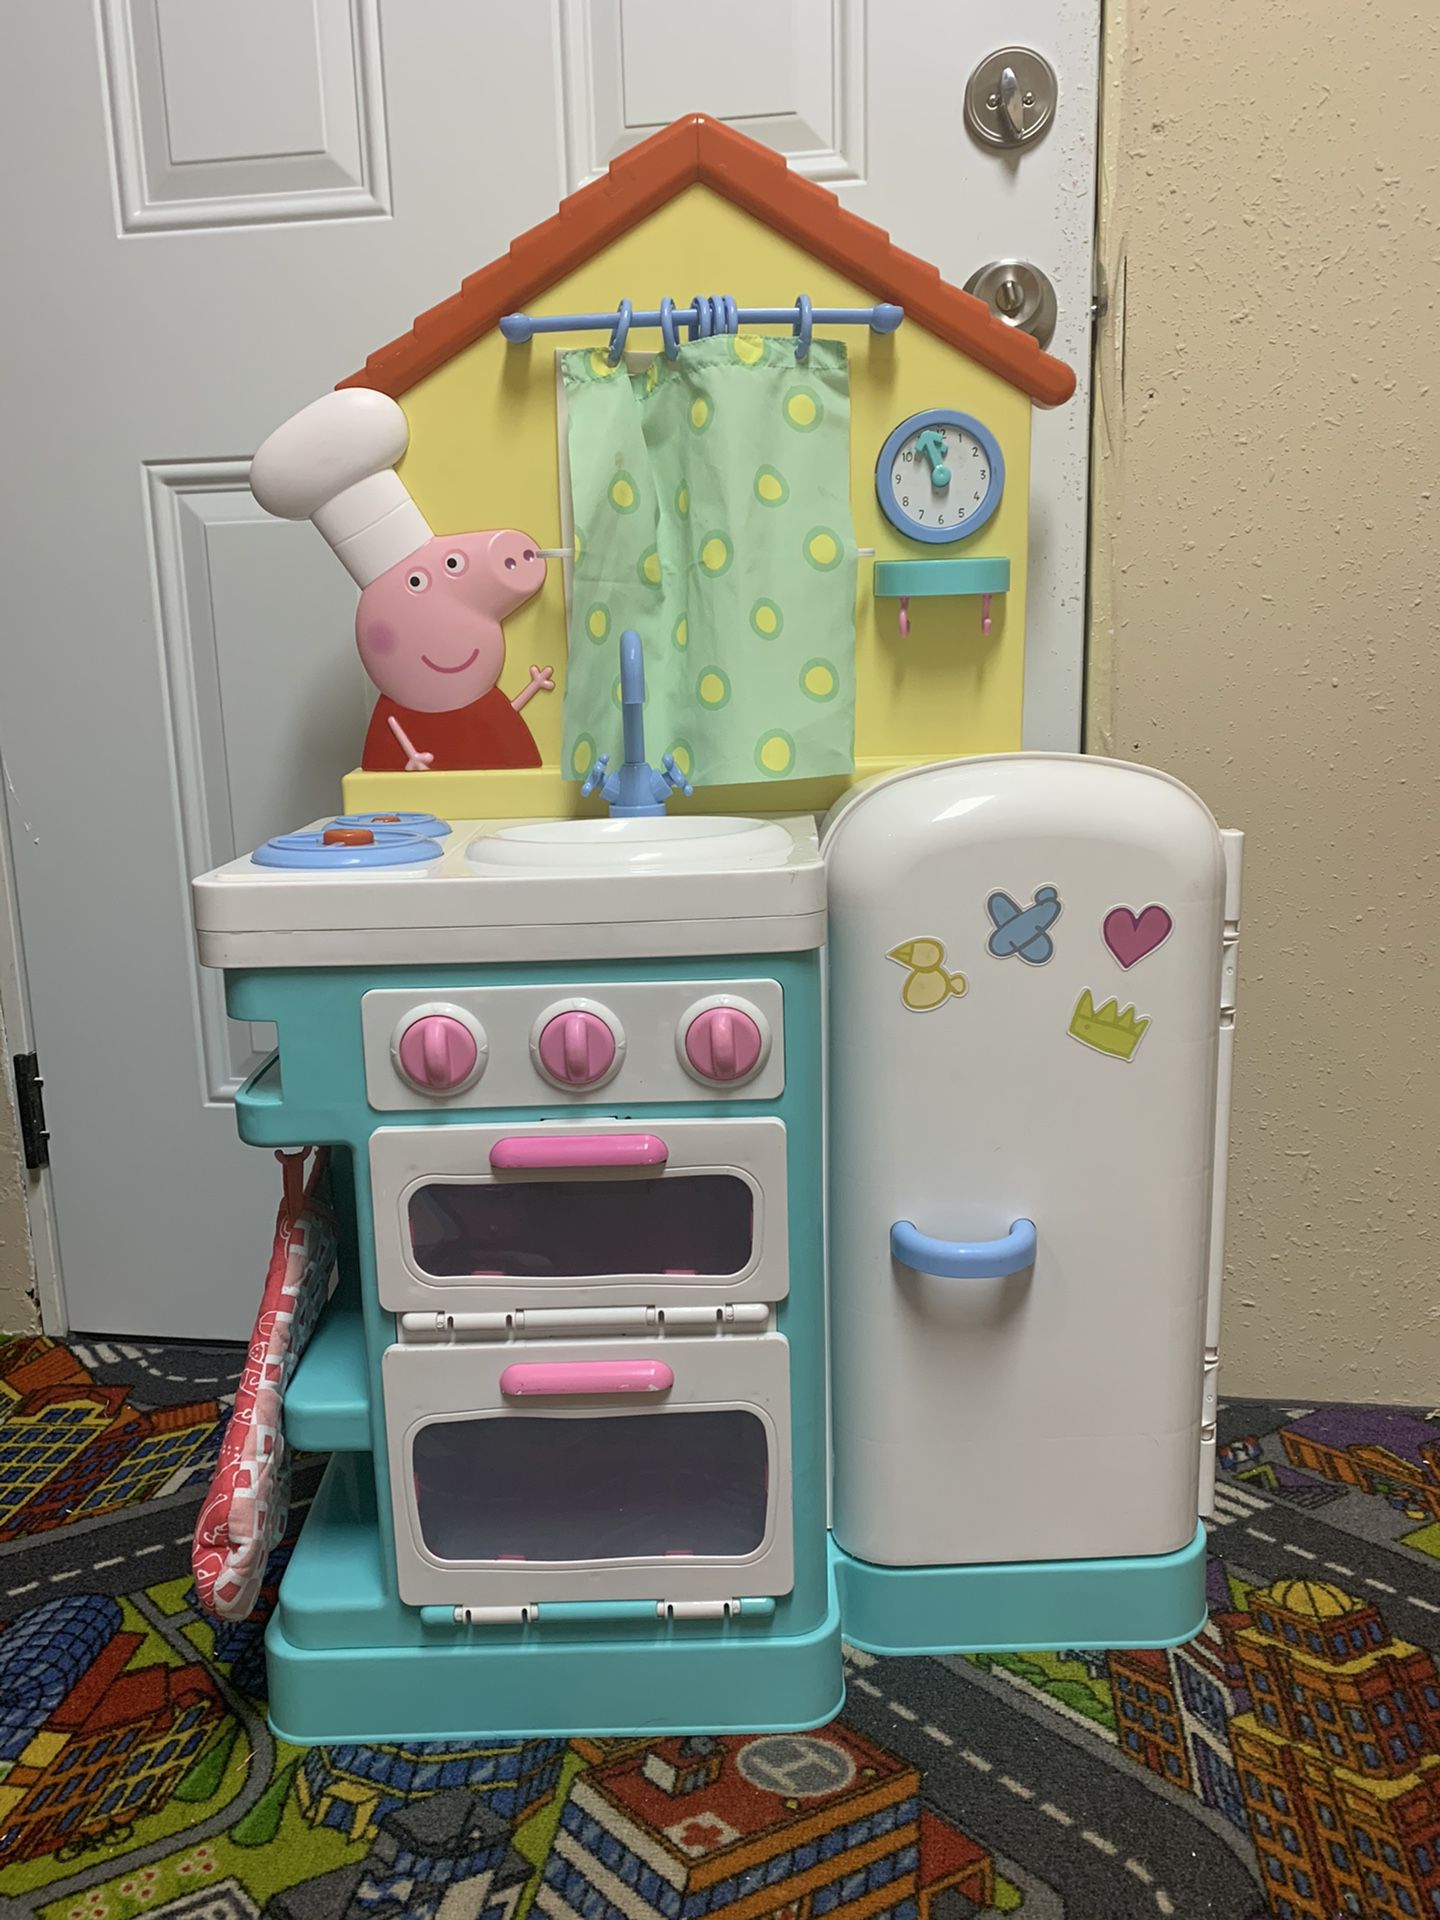 Peppa pig kitchen toy and accessories